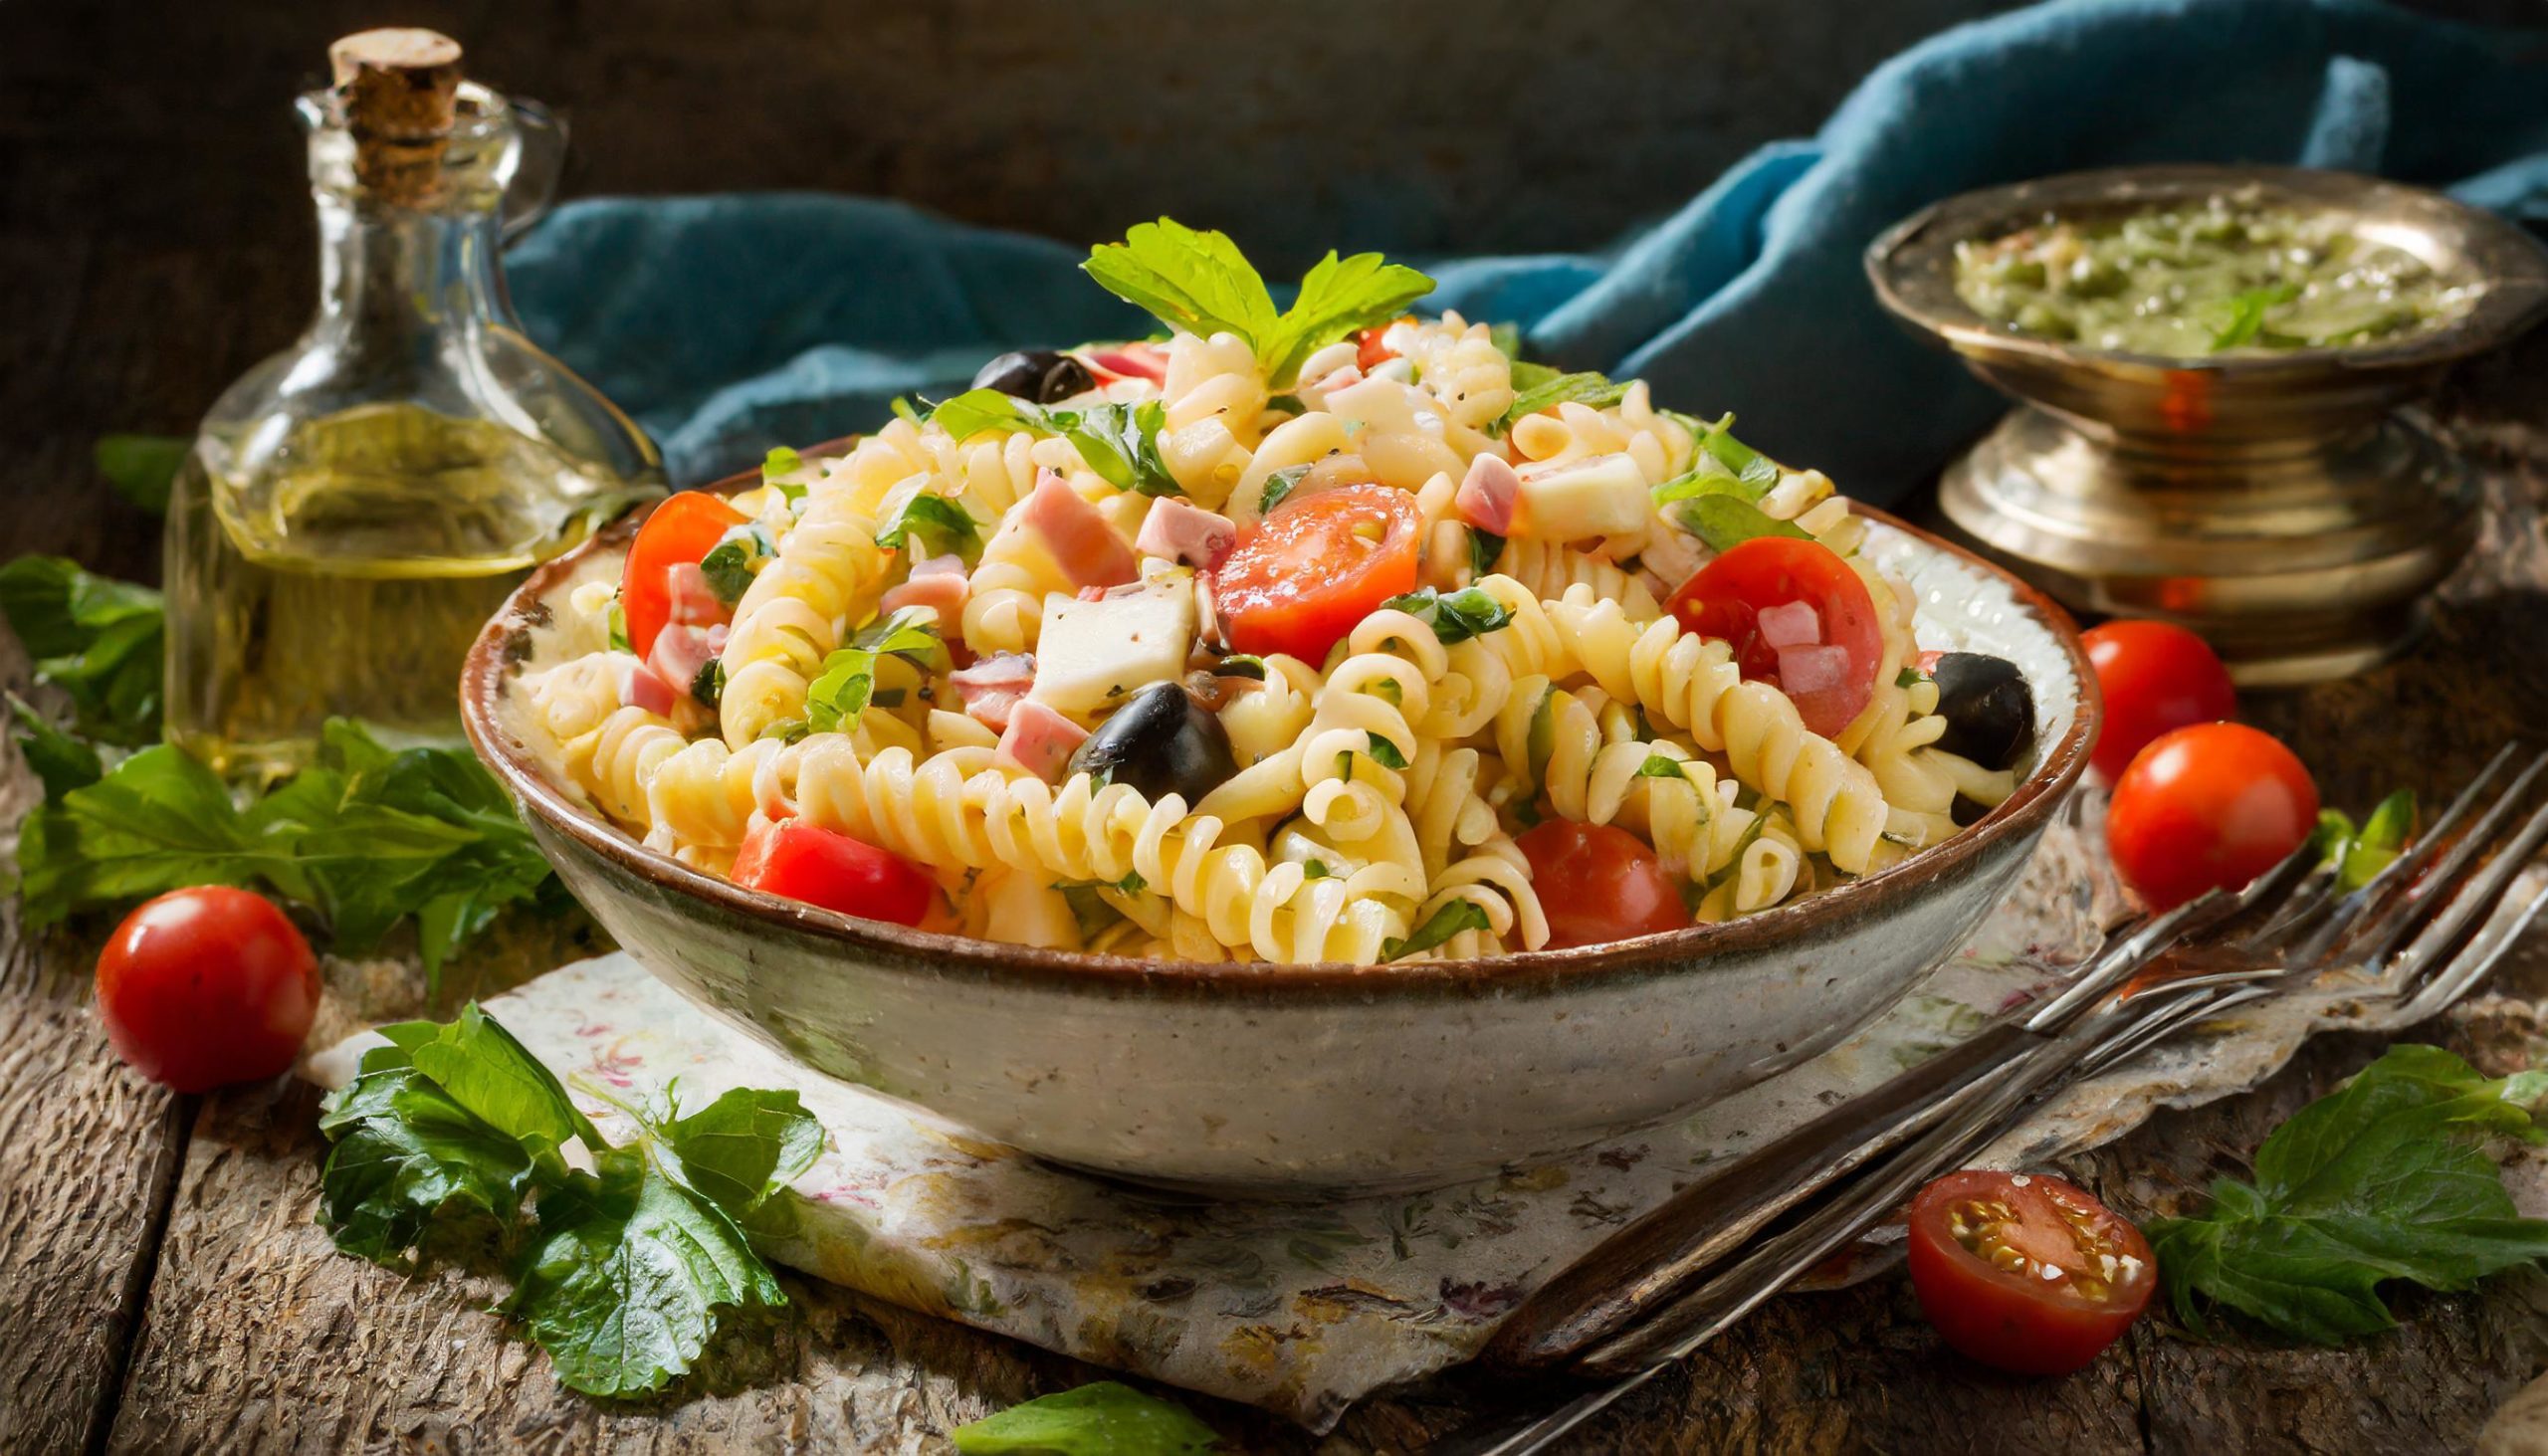 Pasta salad with homemade dressing